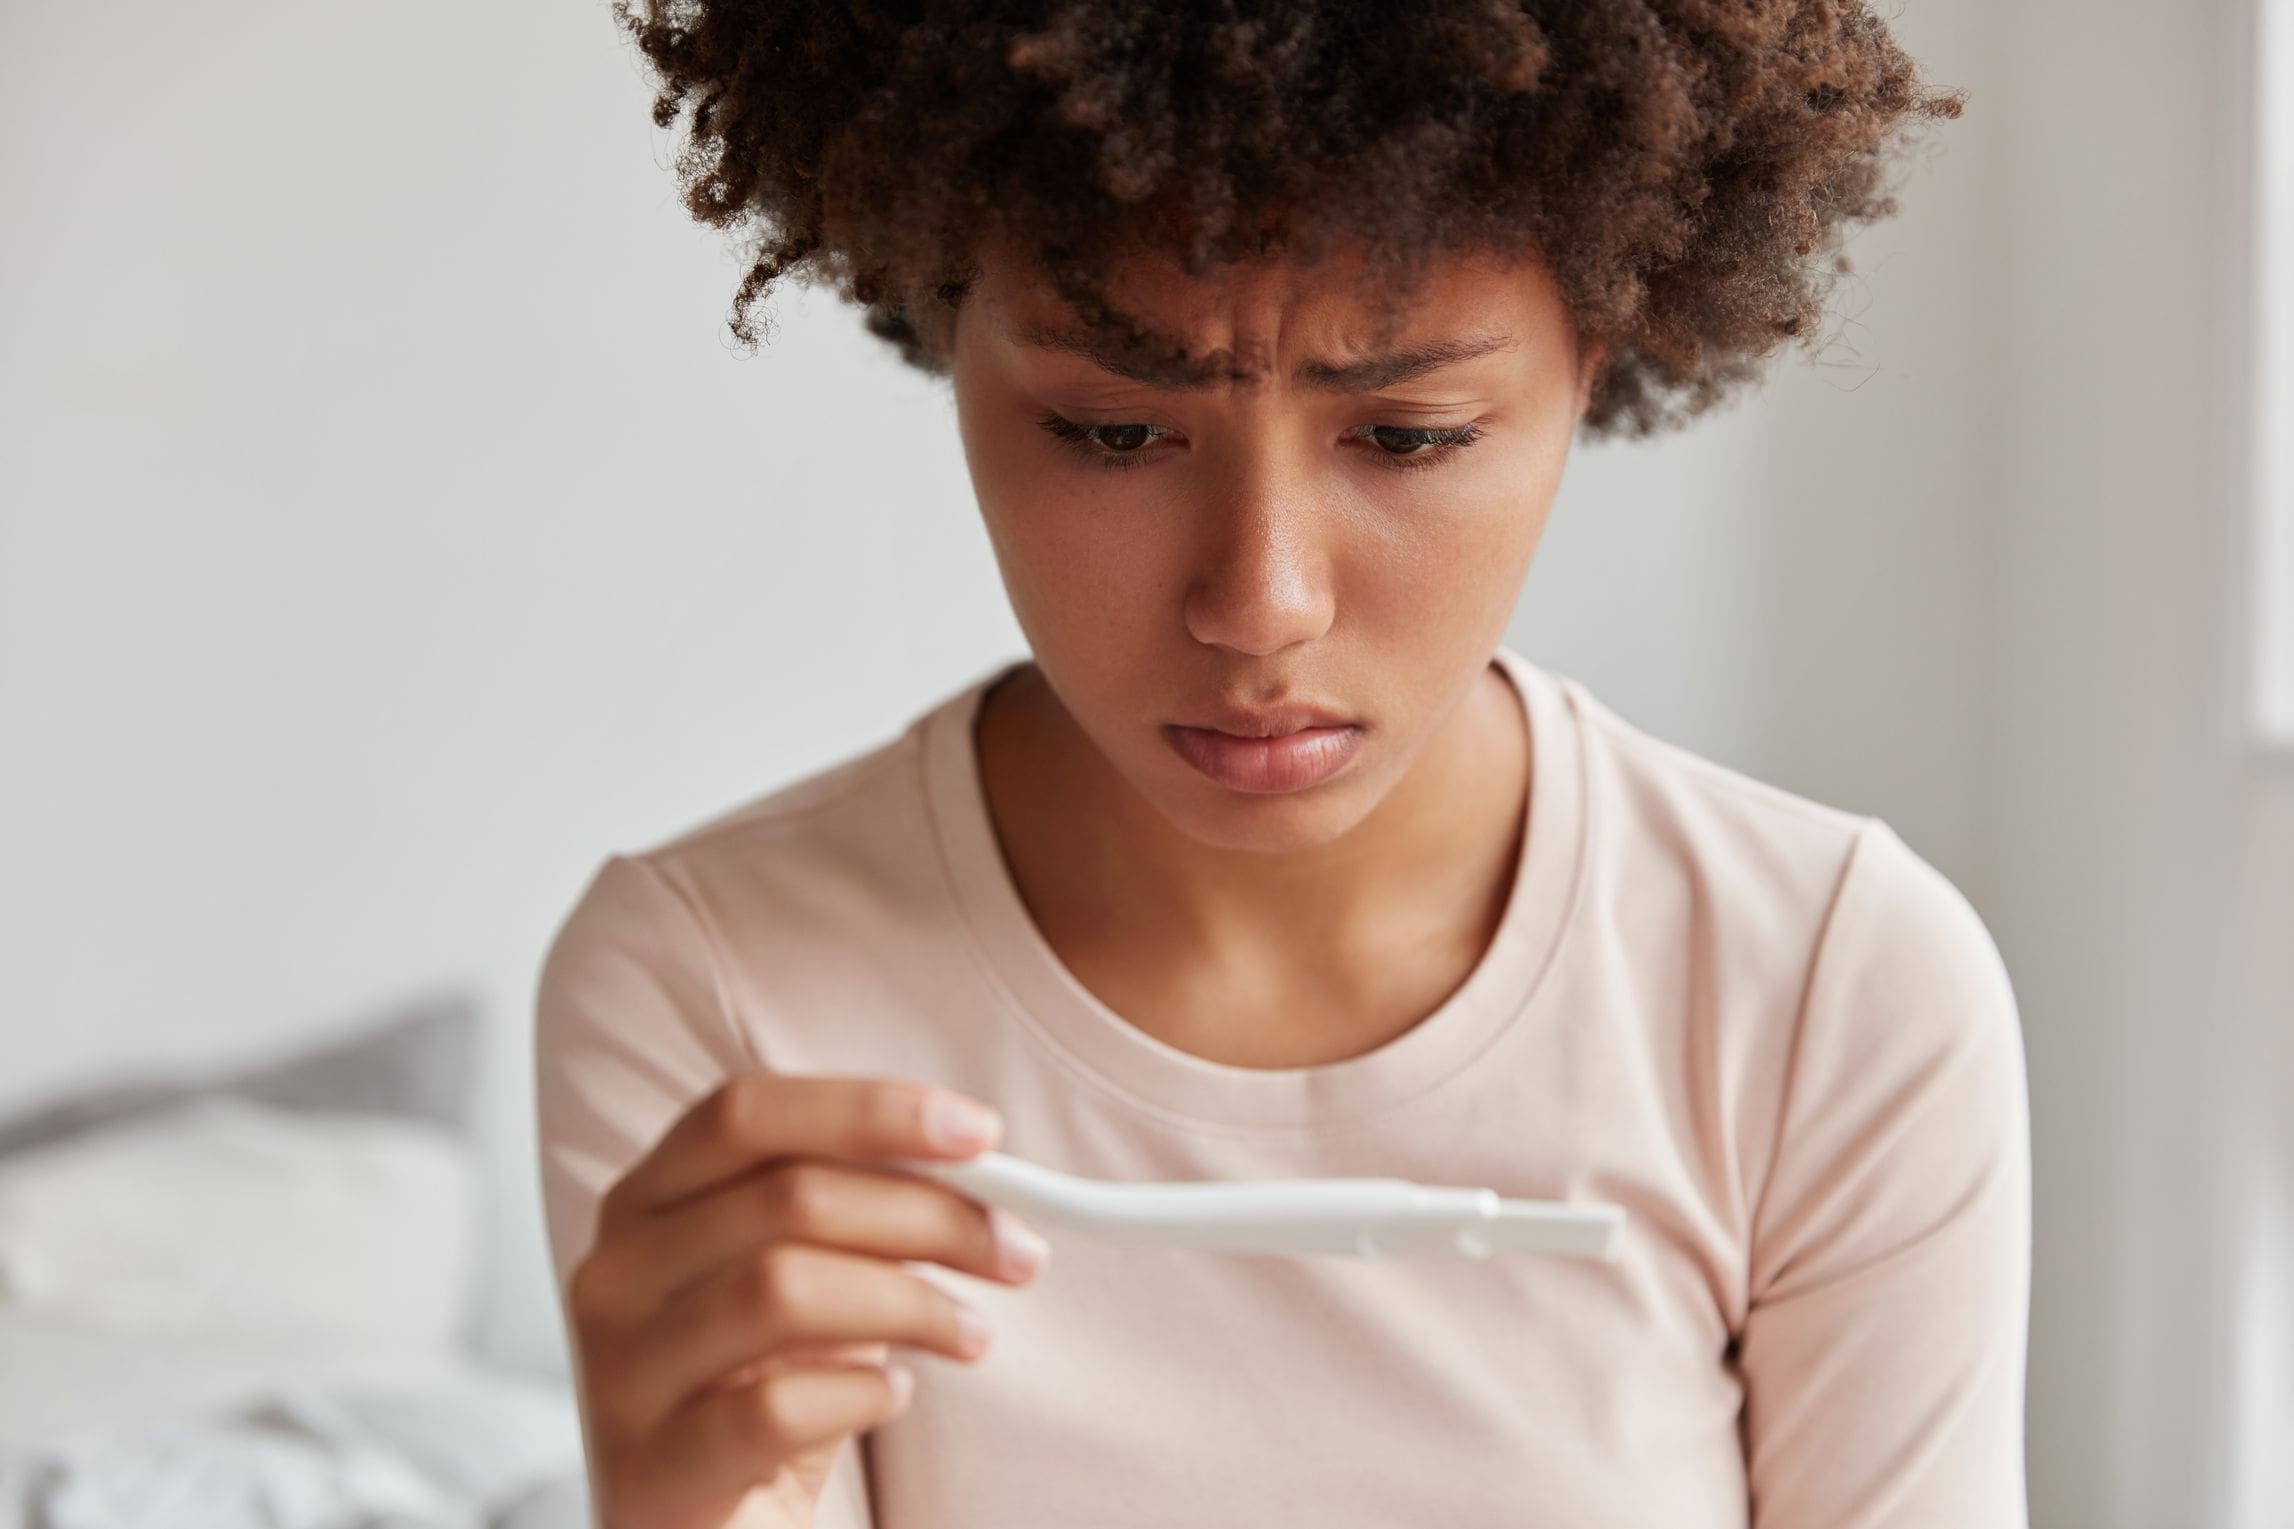 We need to talk about infertility